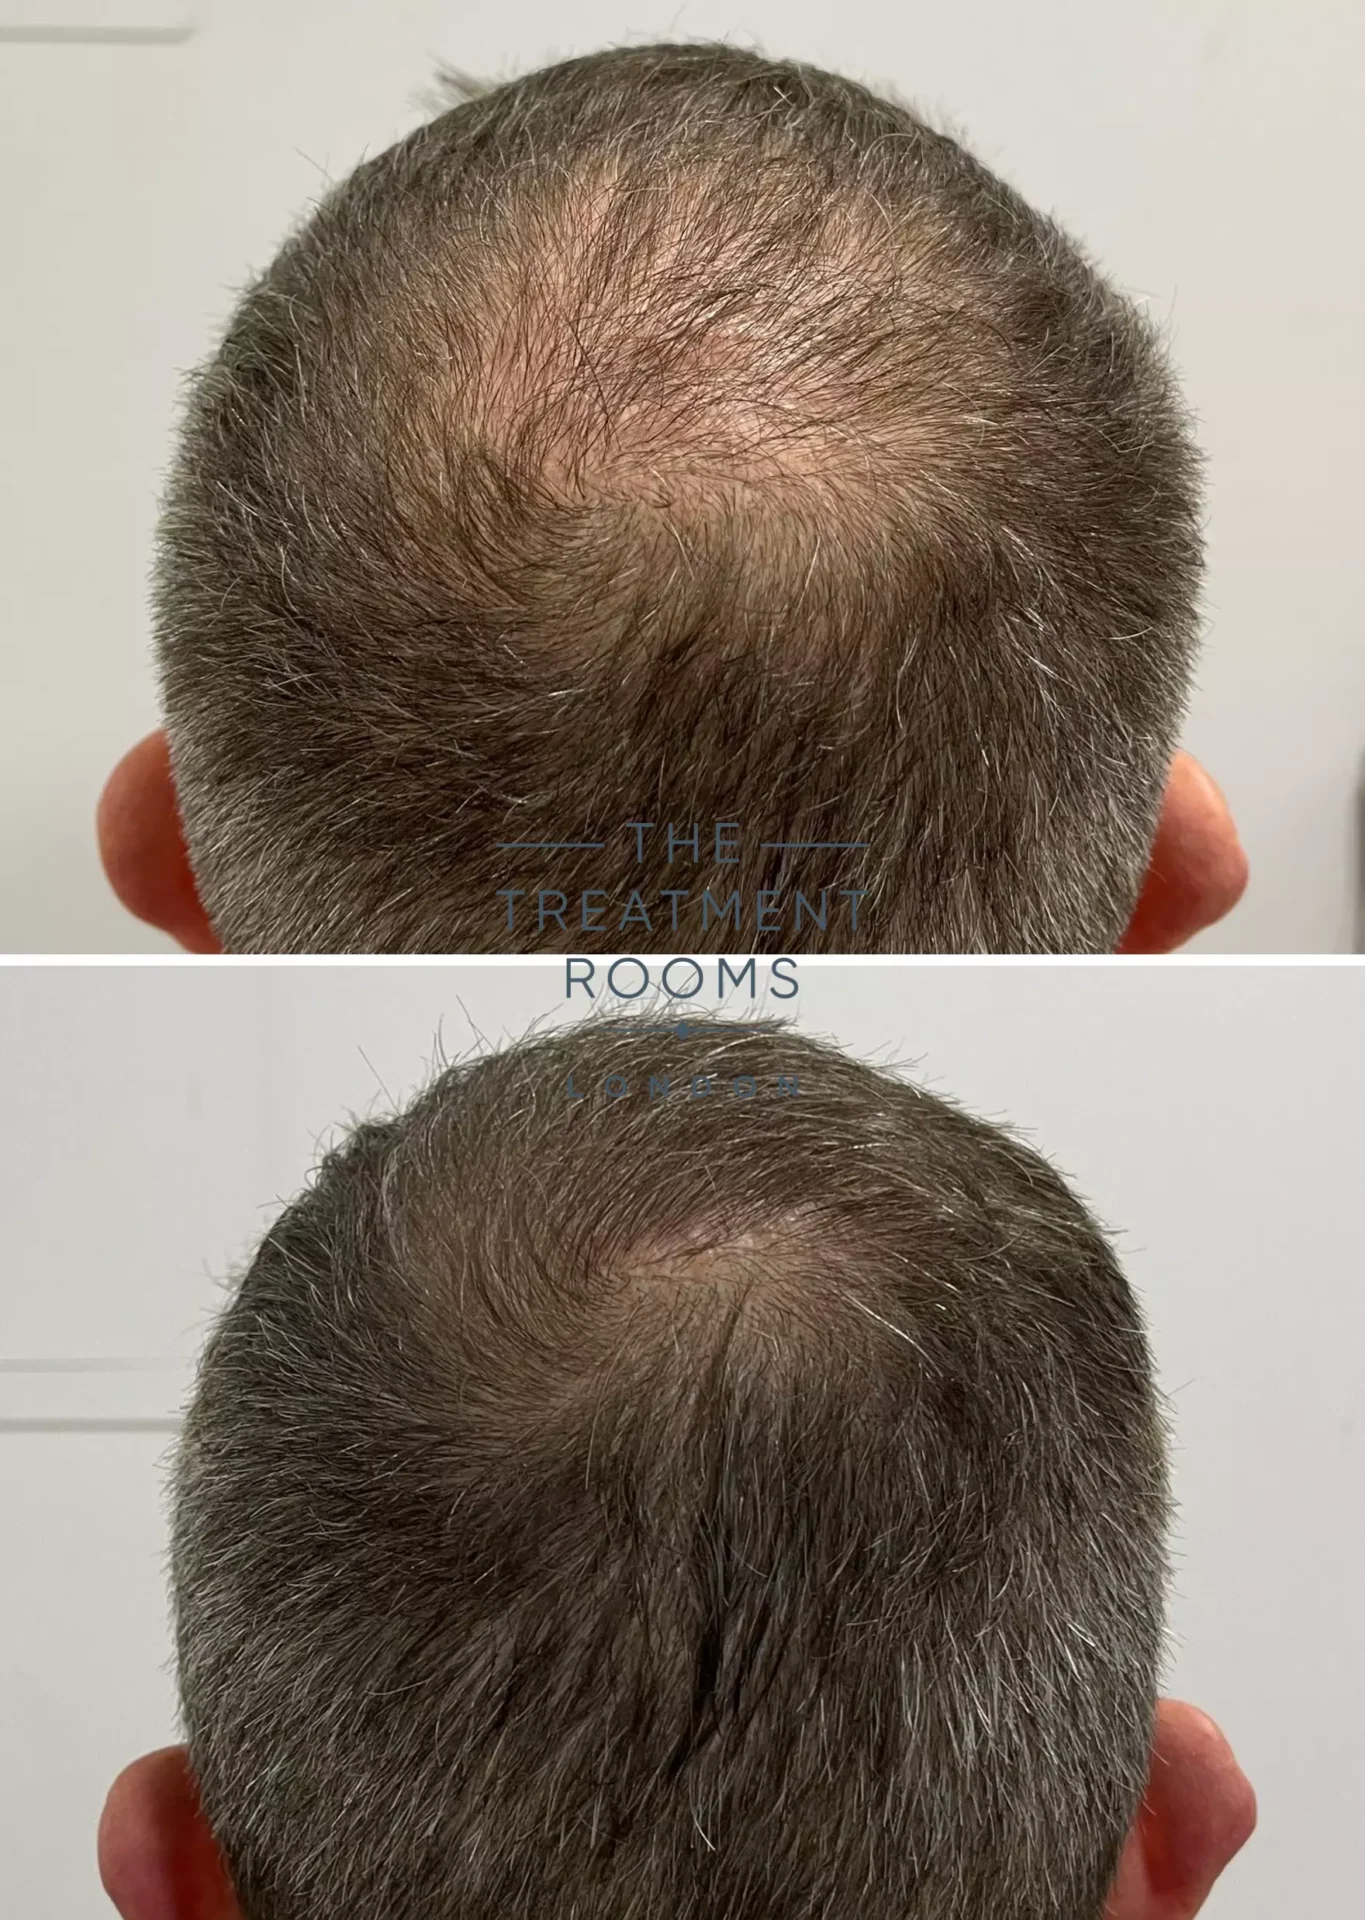 fue clinic crown hair transplant result 1450 grafts